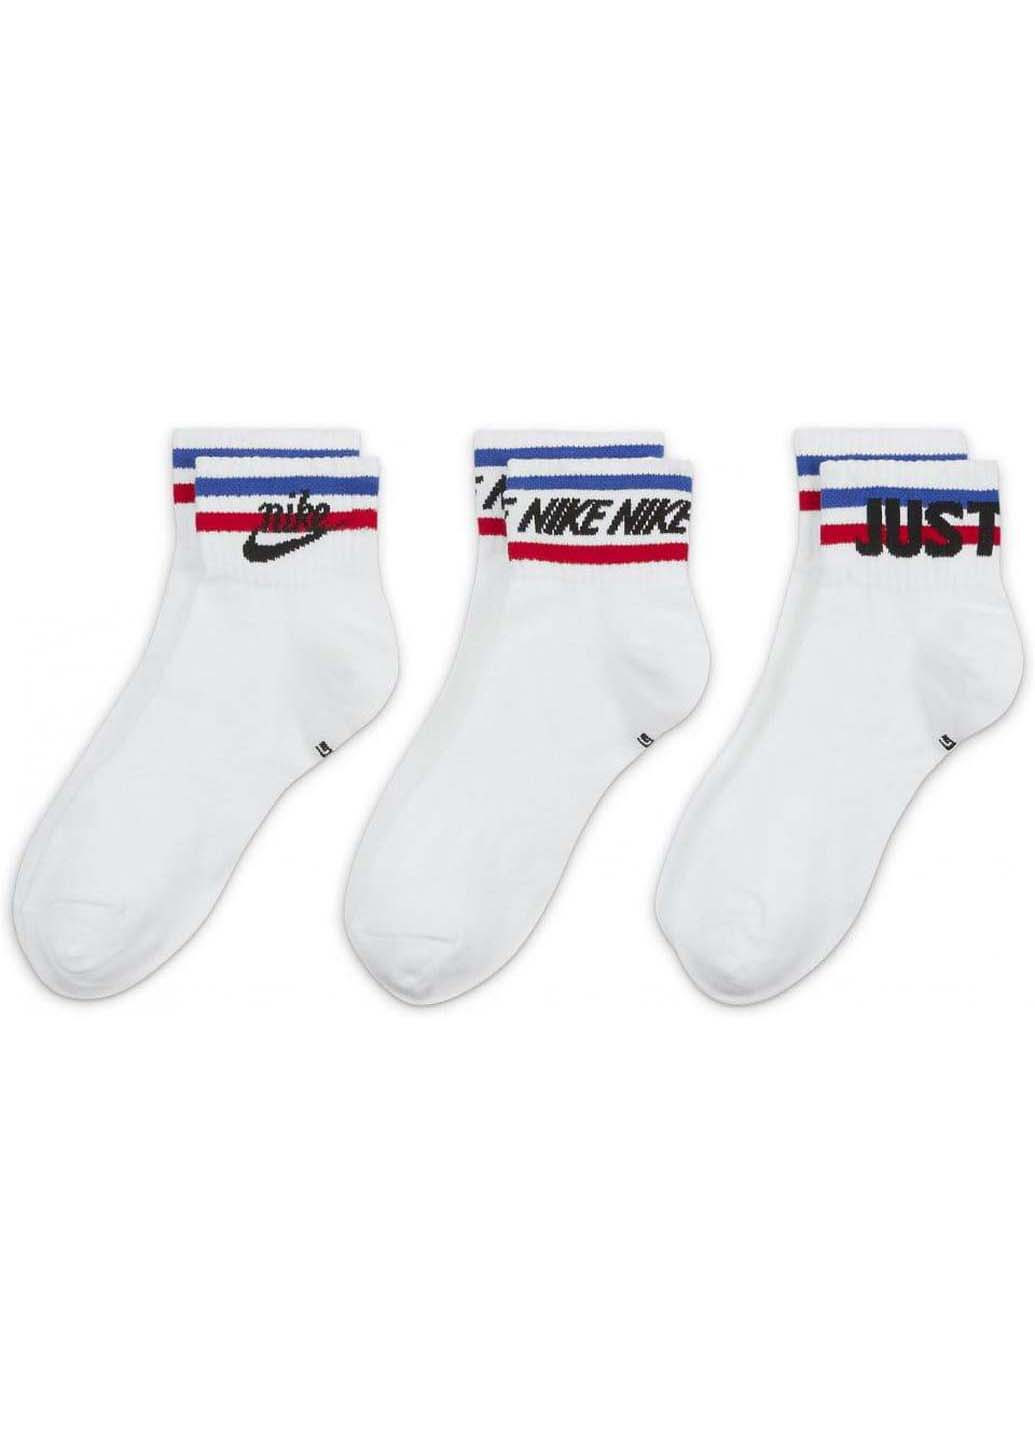 Носки Nike nsw everyday essential an 3-pack (255920507)